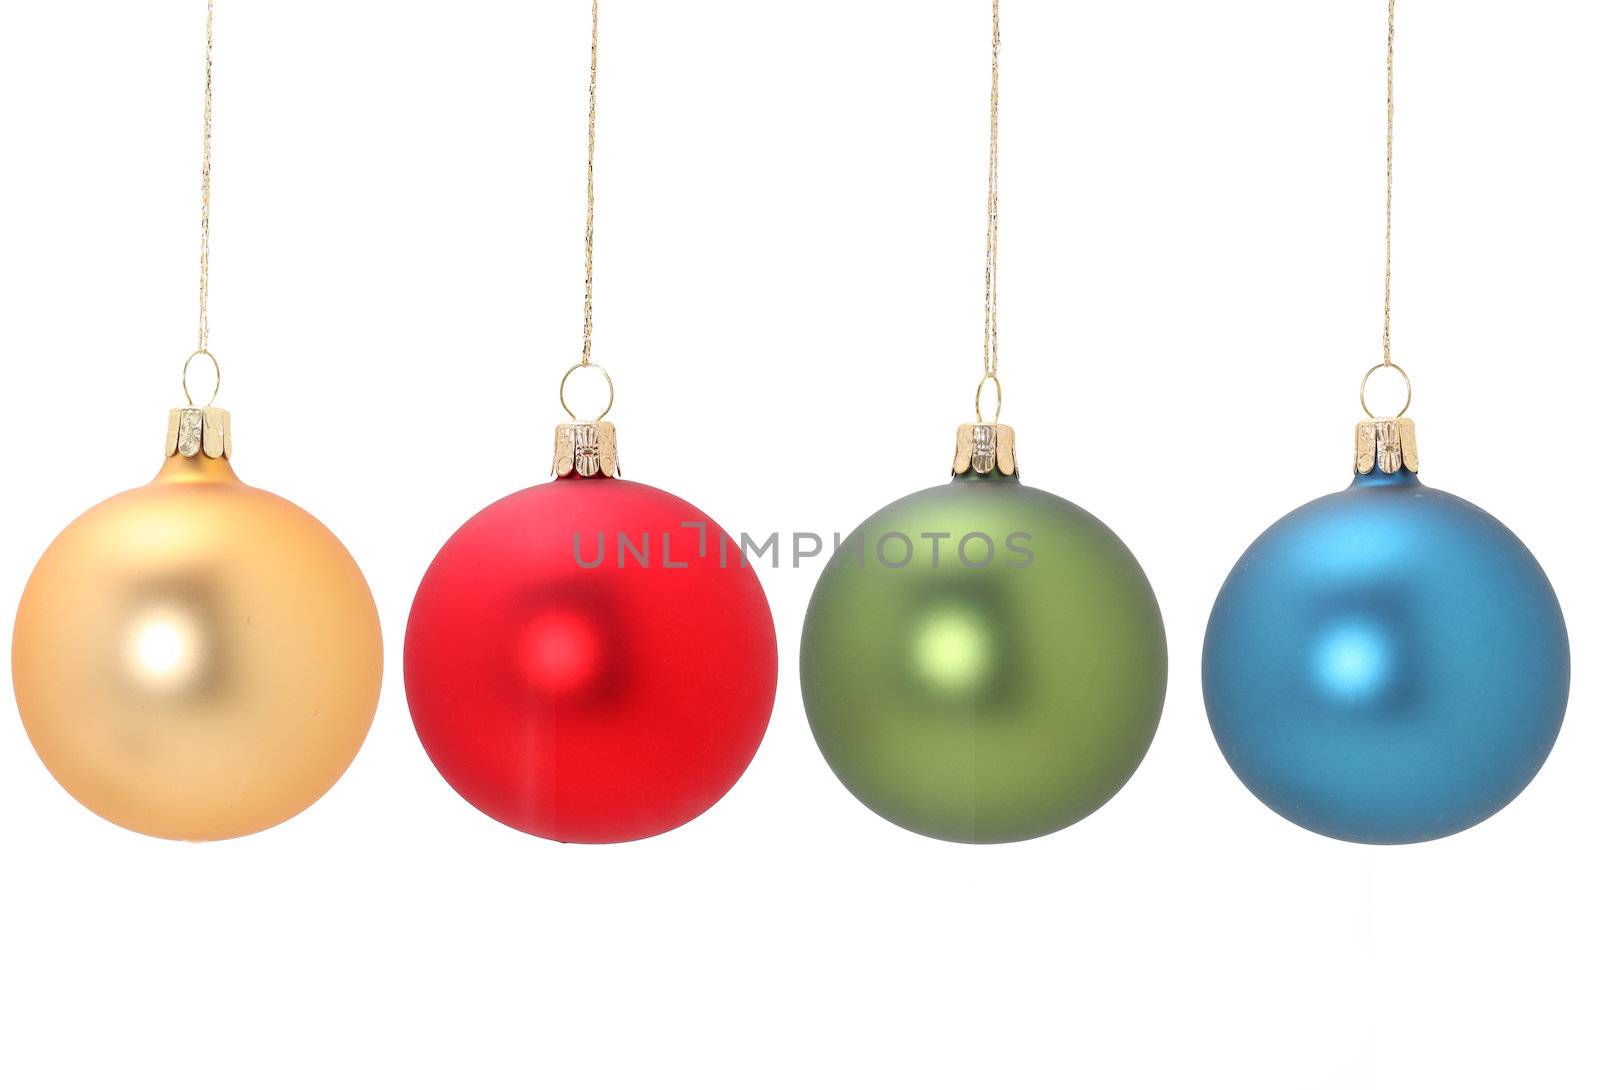 Four christmas balls hanging from golden thread, Gold, Red Green and Blue, shot in studio isolated on white. postprocessing minimal, only levels and saturation. Perfect for your holiday designs or ads